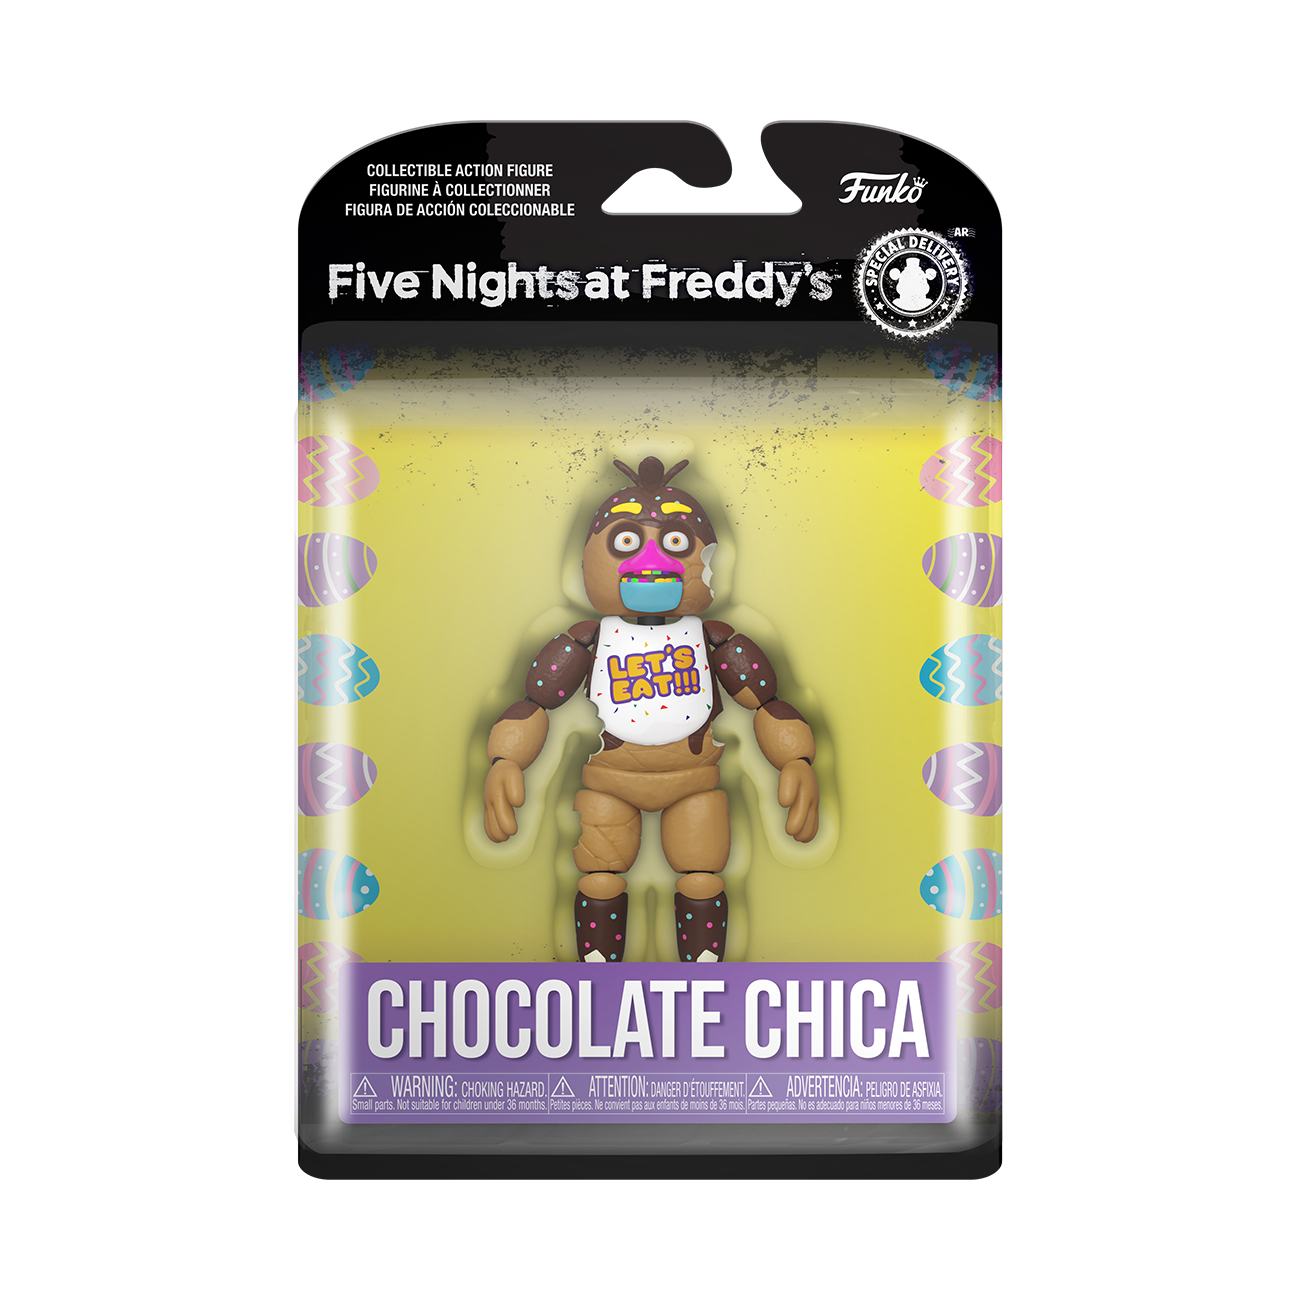 Chocolate Chica from Five Nights at Freddy's action figure